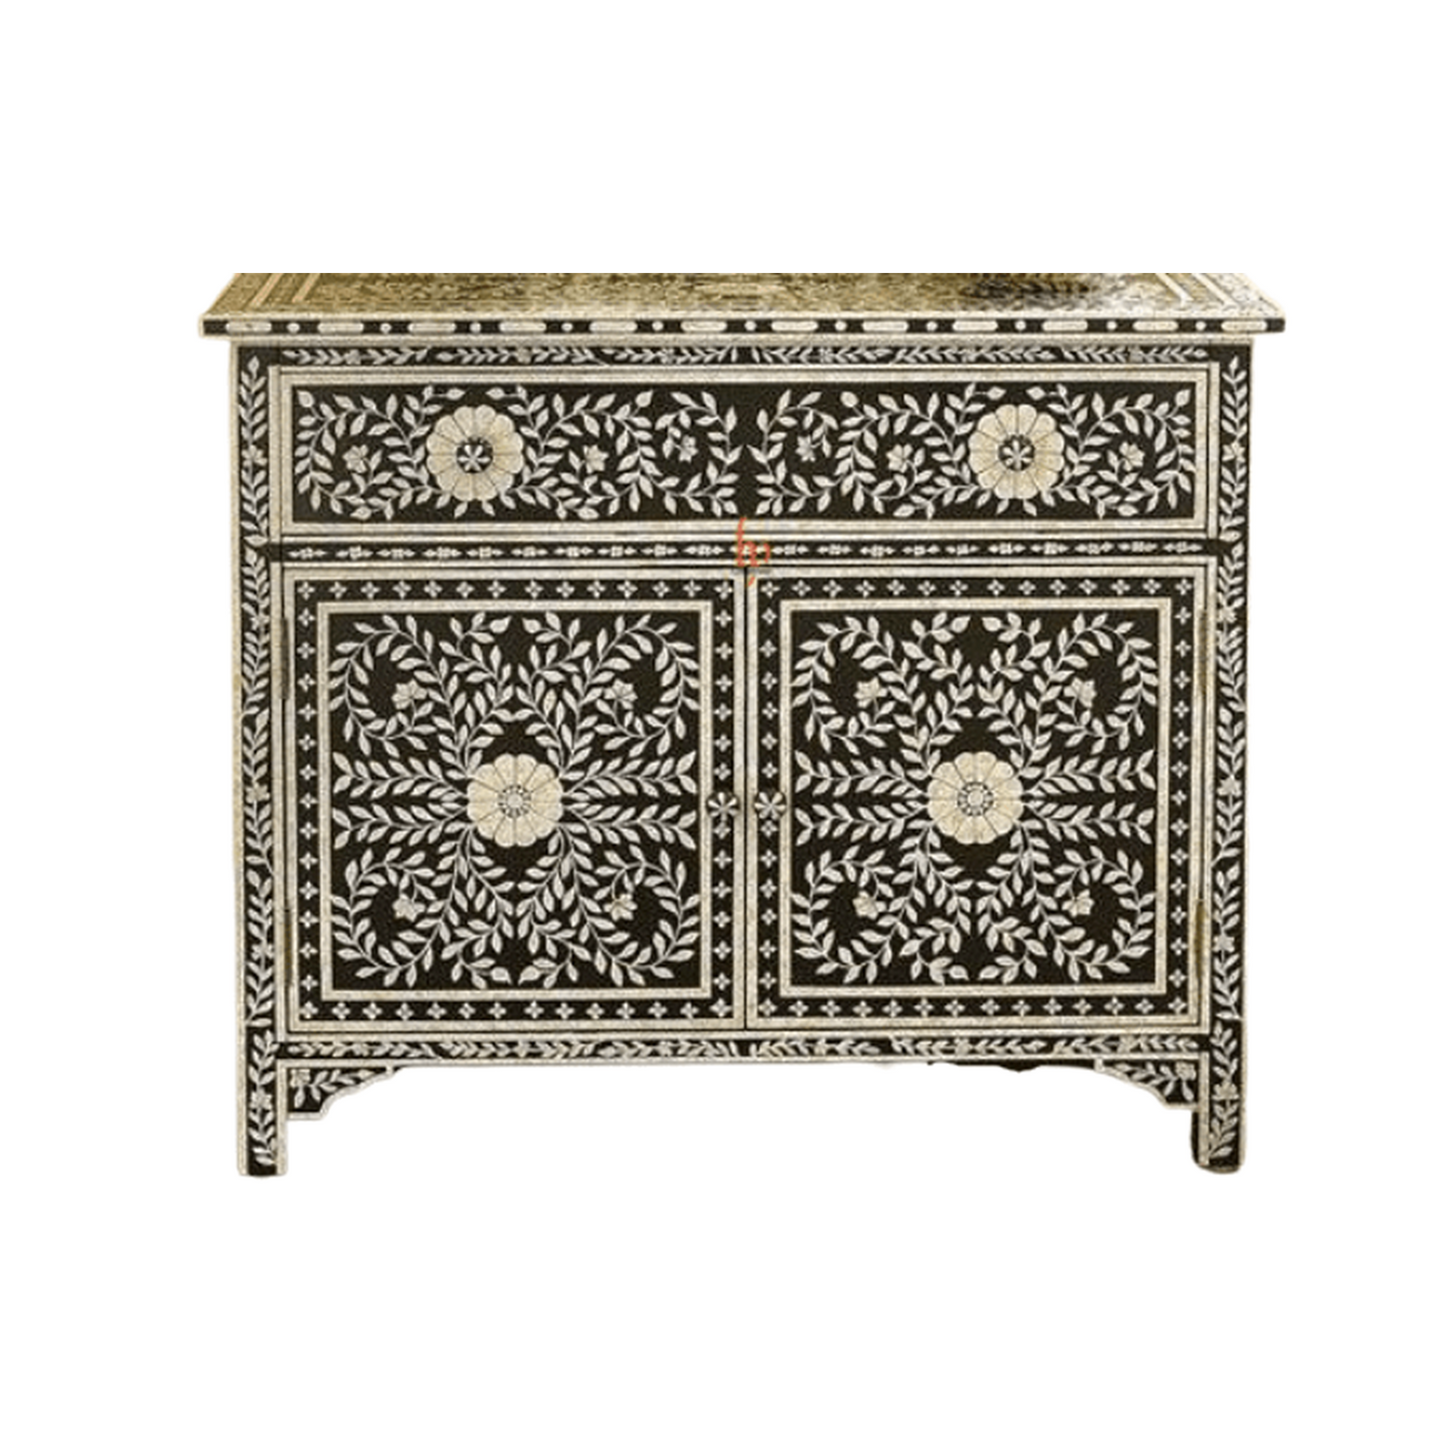 Bone Inlay Chest Of Drawer in Black Floral Design Beautiful Handmade Home Decor Inlay Furniture Dresser Cabinet